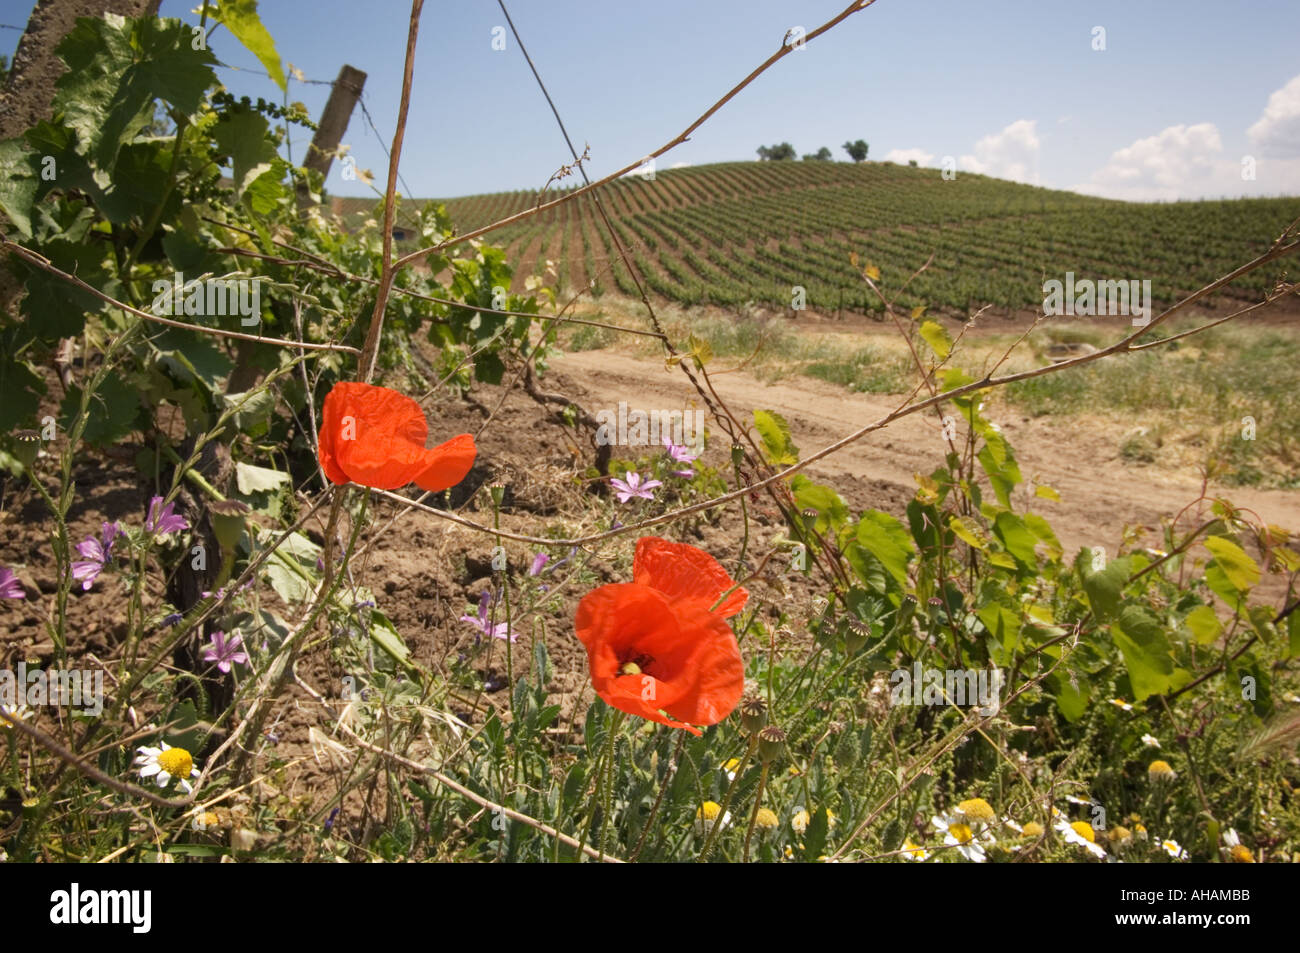 red Italian poppies and wildflowers in foreground with rows of grape vines in the Regaliali estate vineyard in Sicily Italy Stock Photo